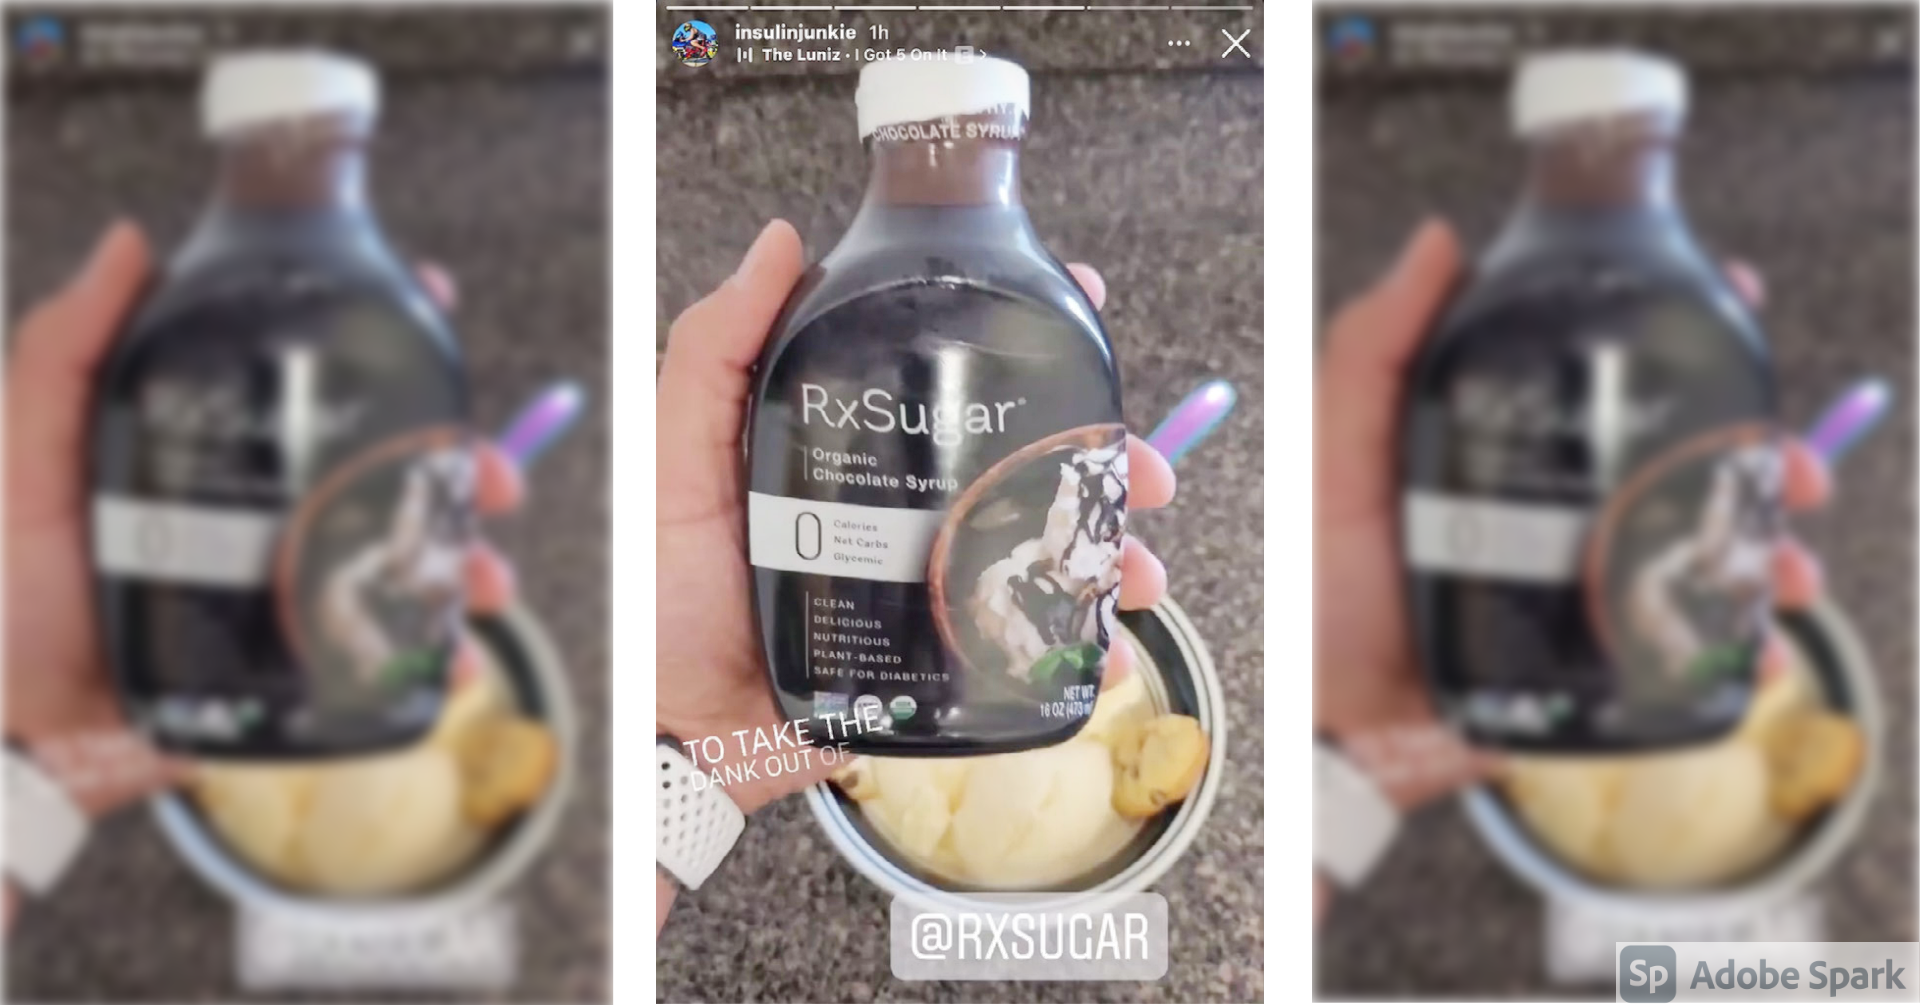 InsulinJunkie Loves His RxSugar Organic Chocolate Syrup